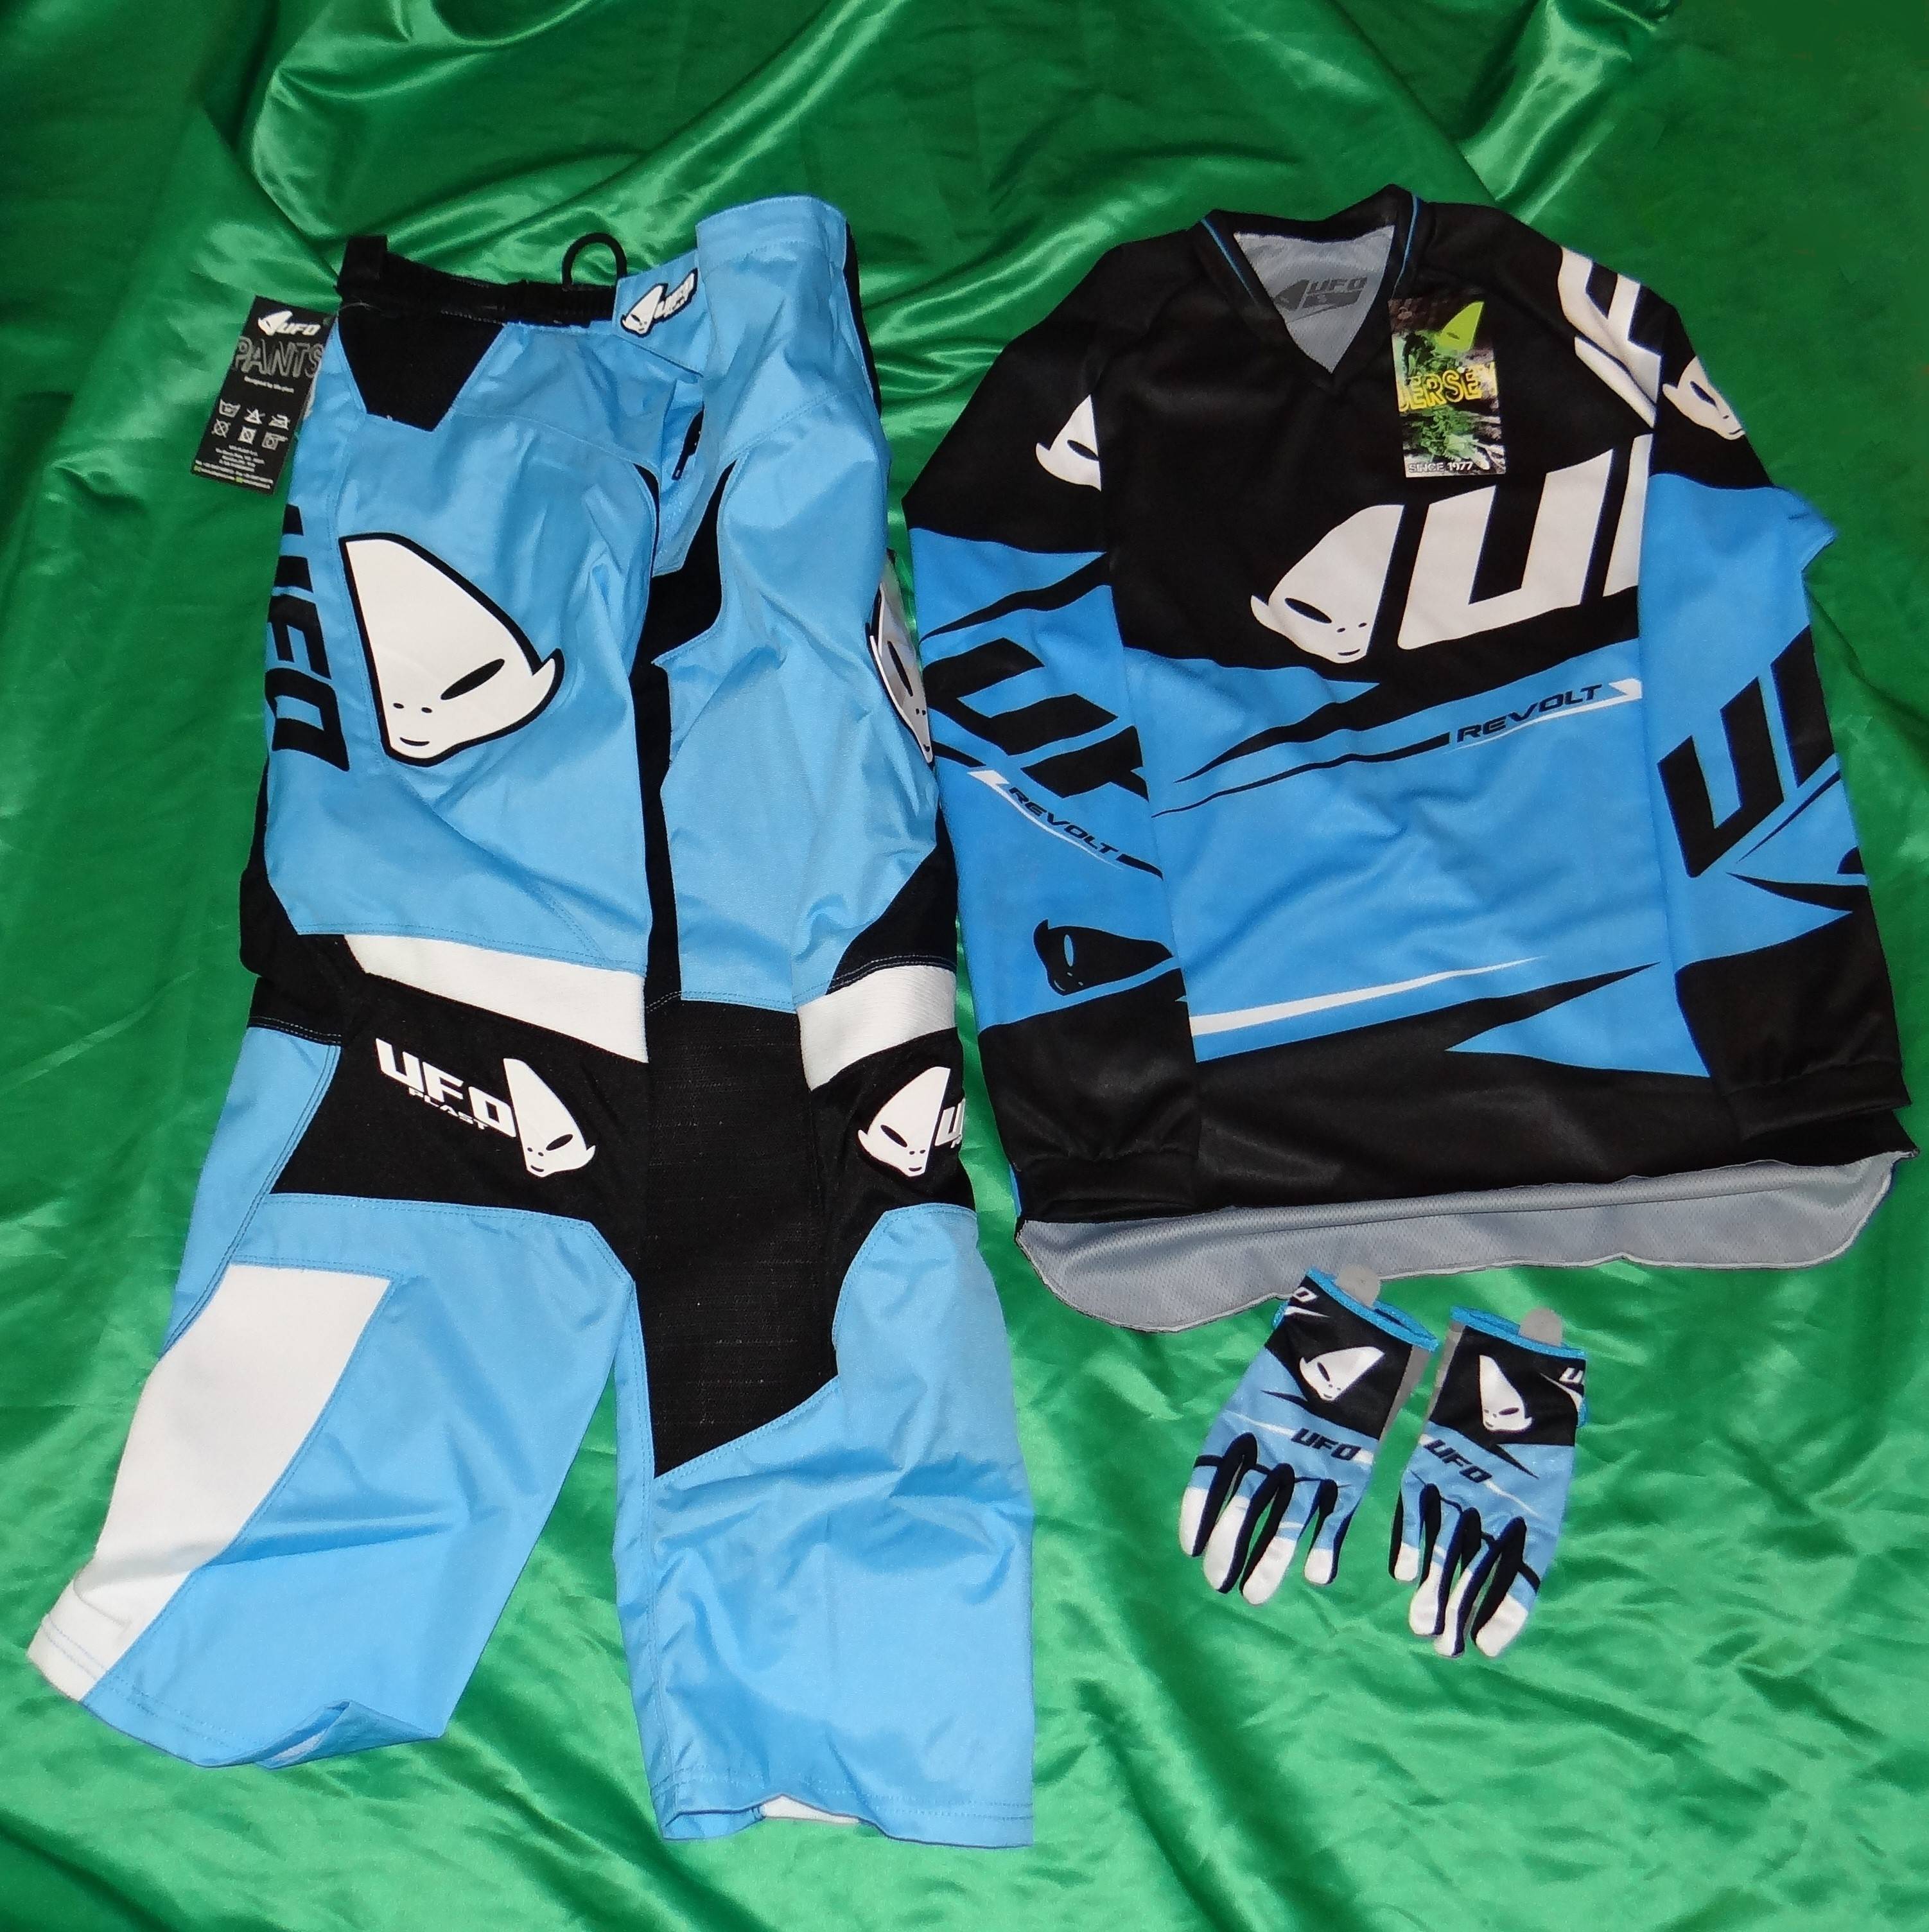 Sets, complete outfits for motorcycle cross, enduro, trial